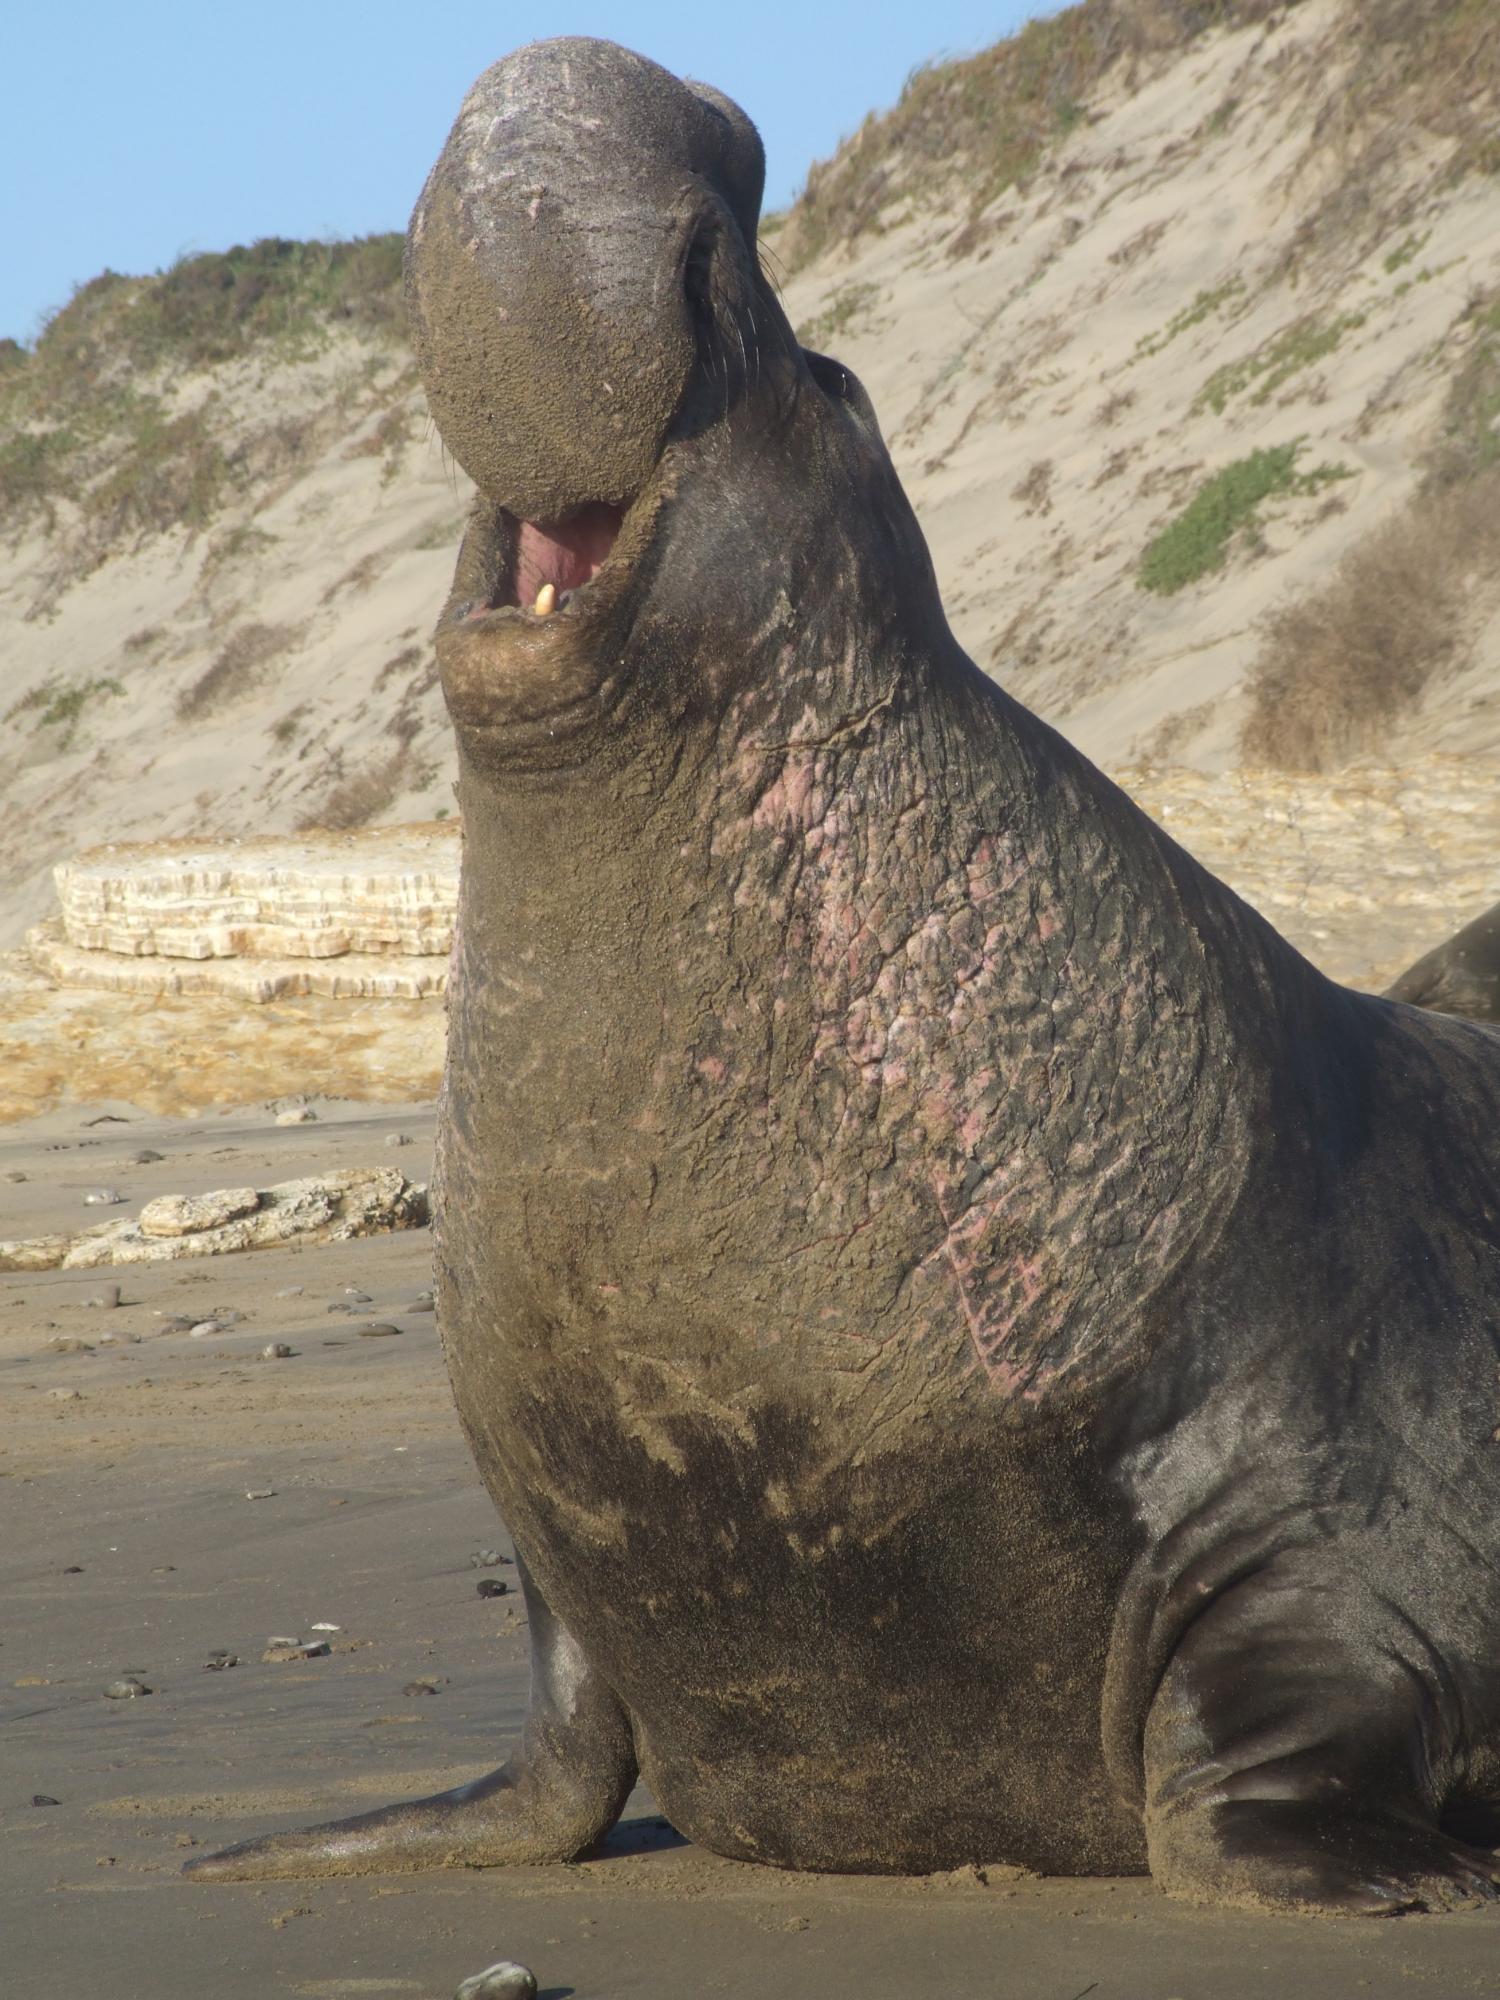 Elephant seals recognize each other by the rhythm of their calls